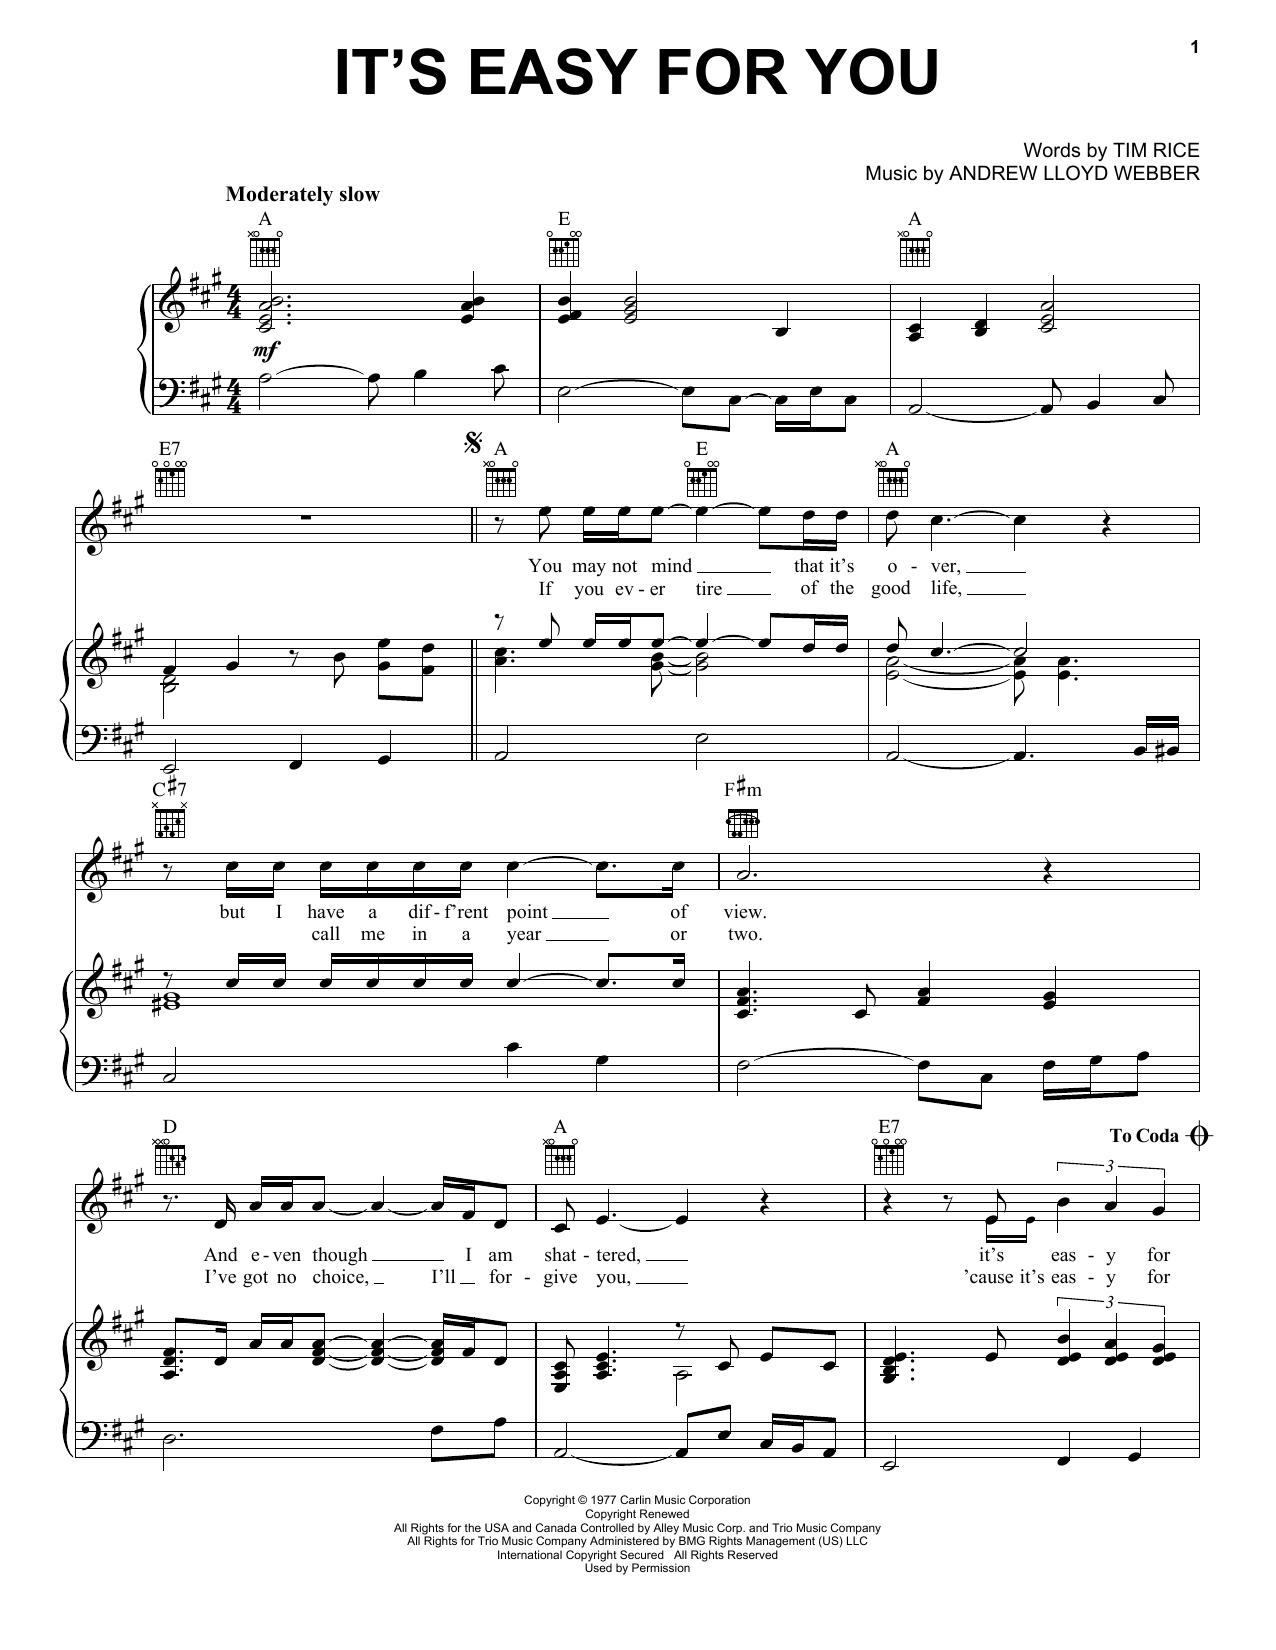 Download Andrew Lloyd Webber It's Easy For You Sheet Music